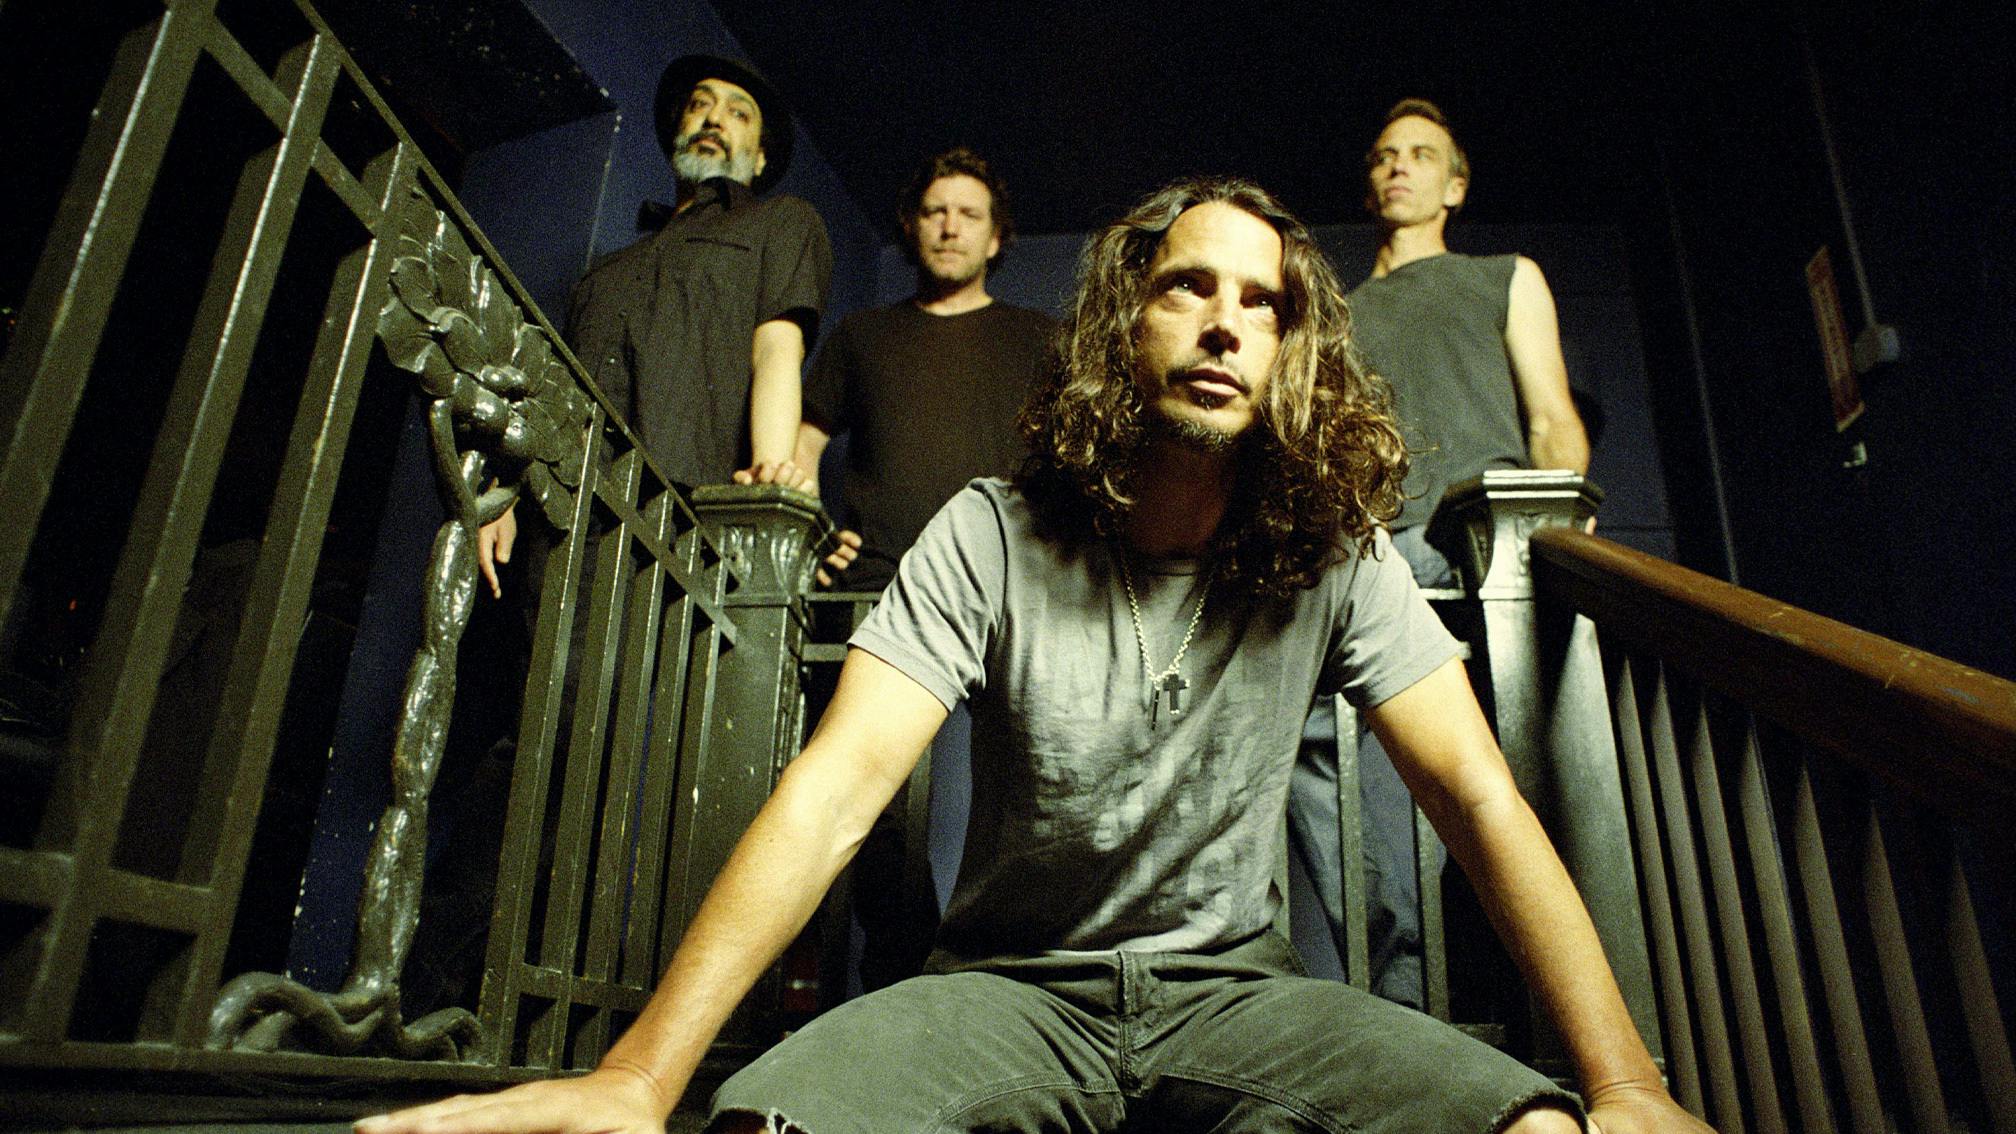 The 20 greatest Soundgarden songs – ranked